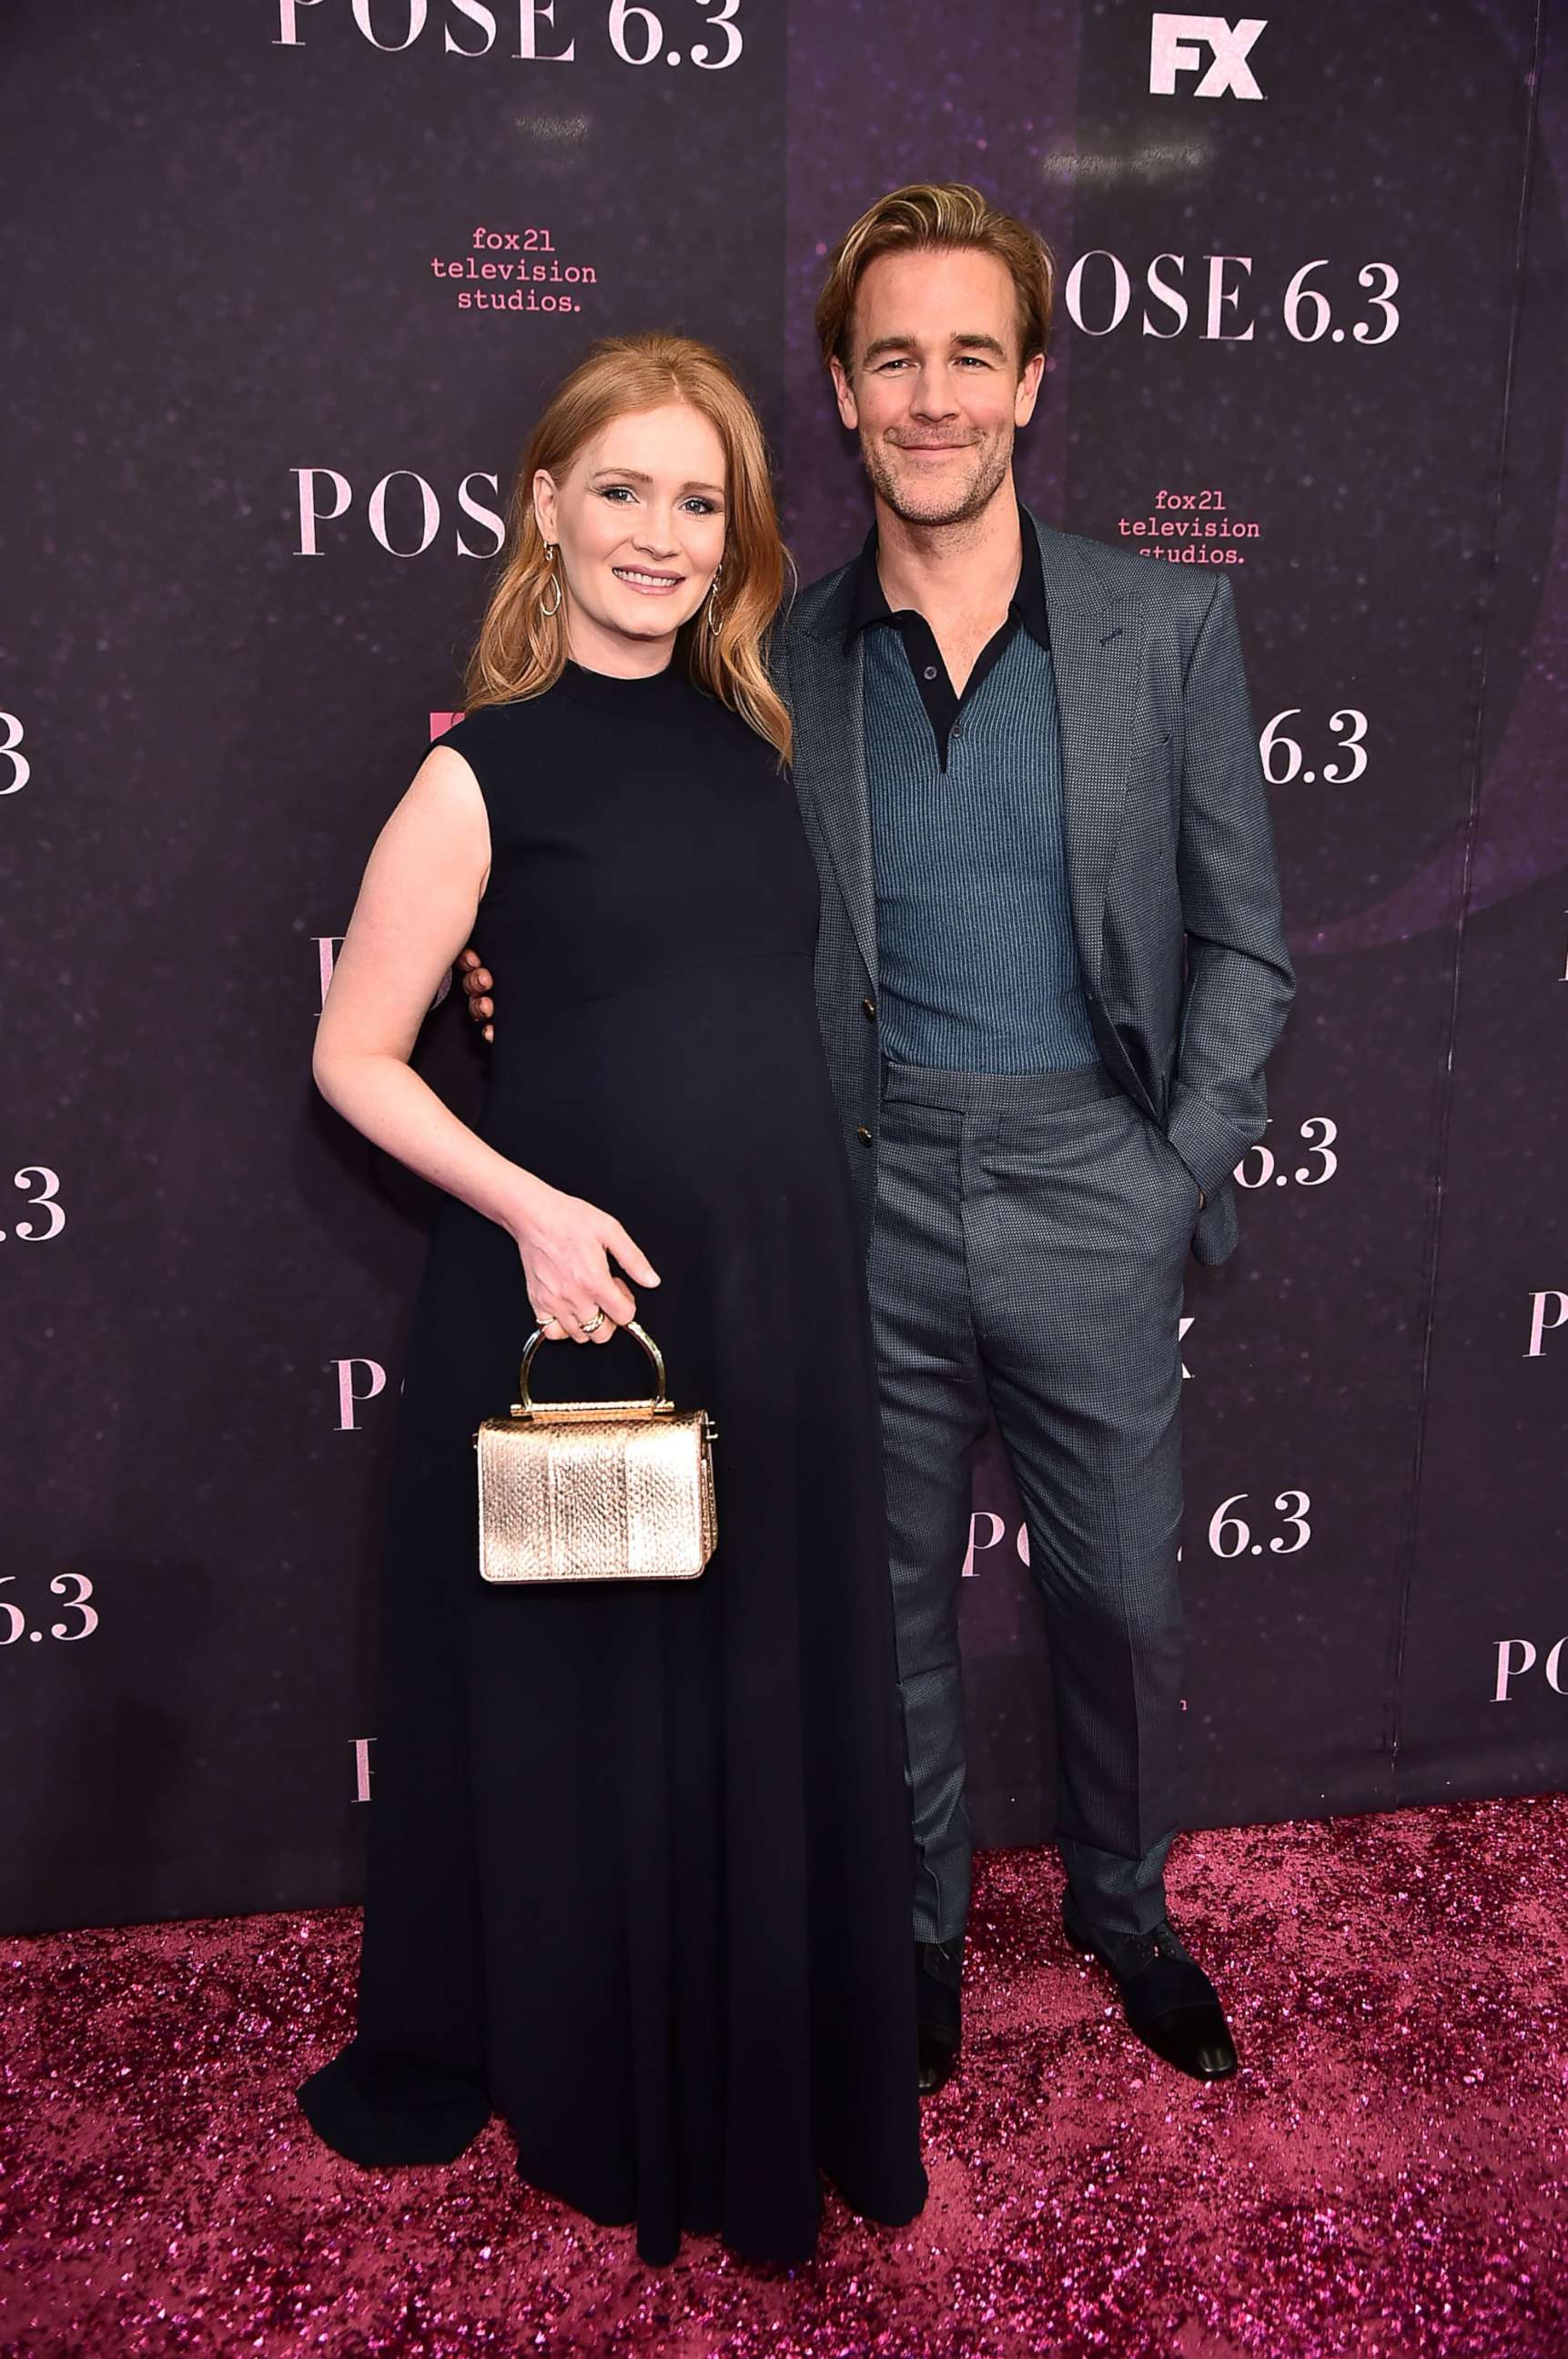 PHOTO: Kimberly Brook and James Van Der Beek attend the "Pose" New York Premiere at Hammerstein Ballroom, May 17, 2018, in New York City.